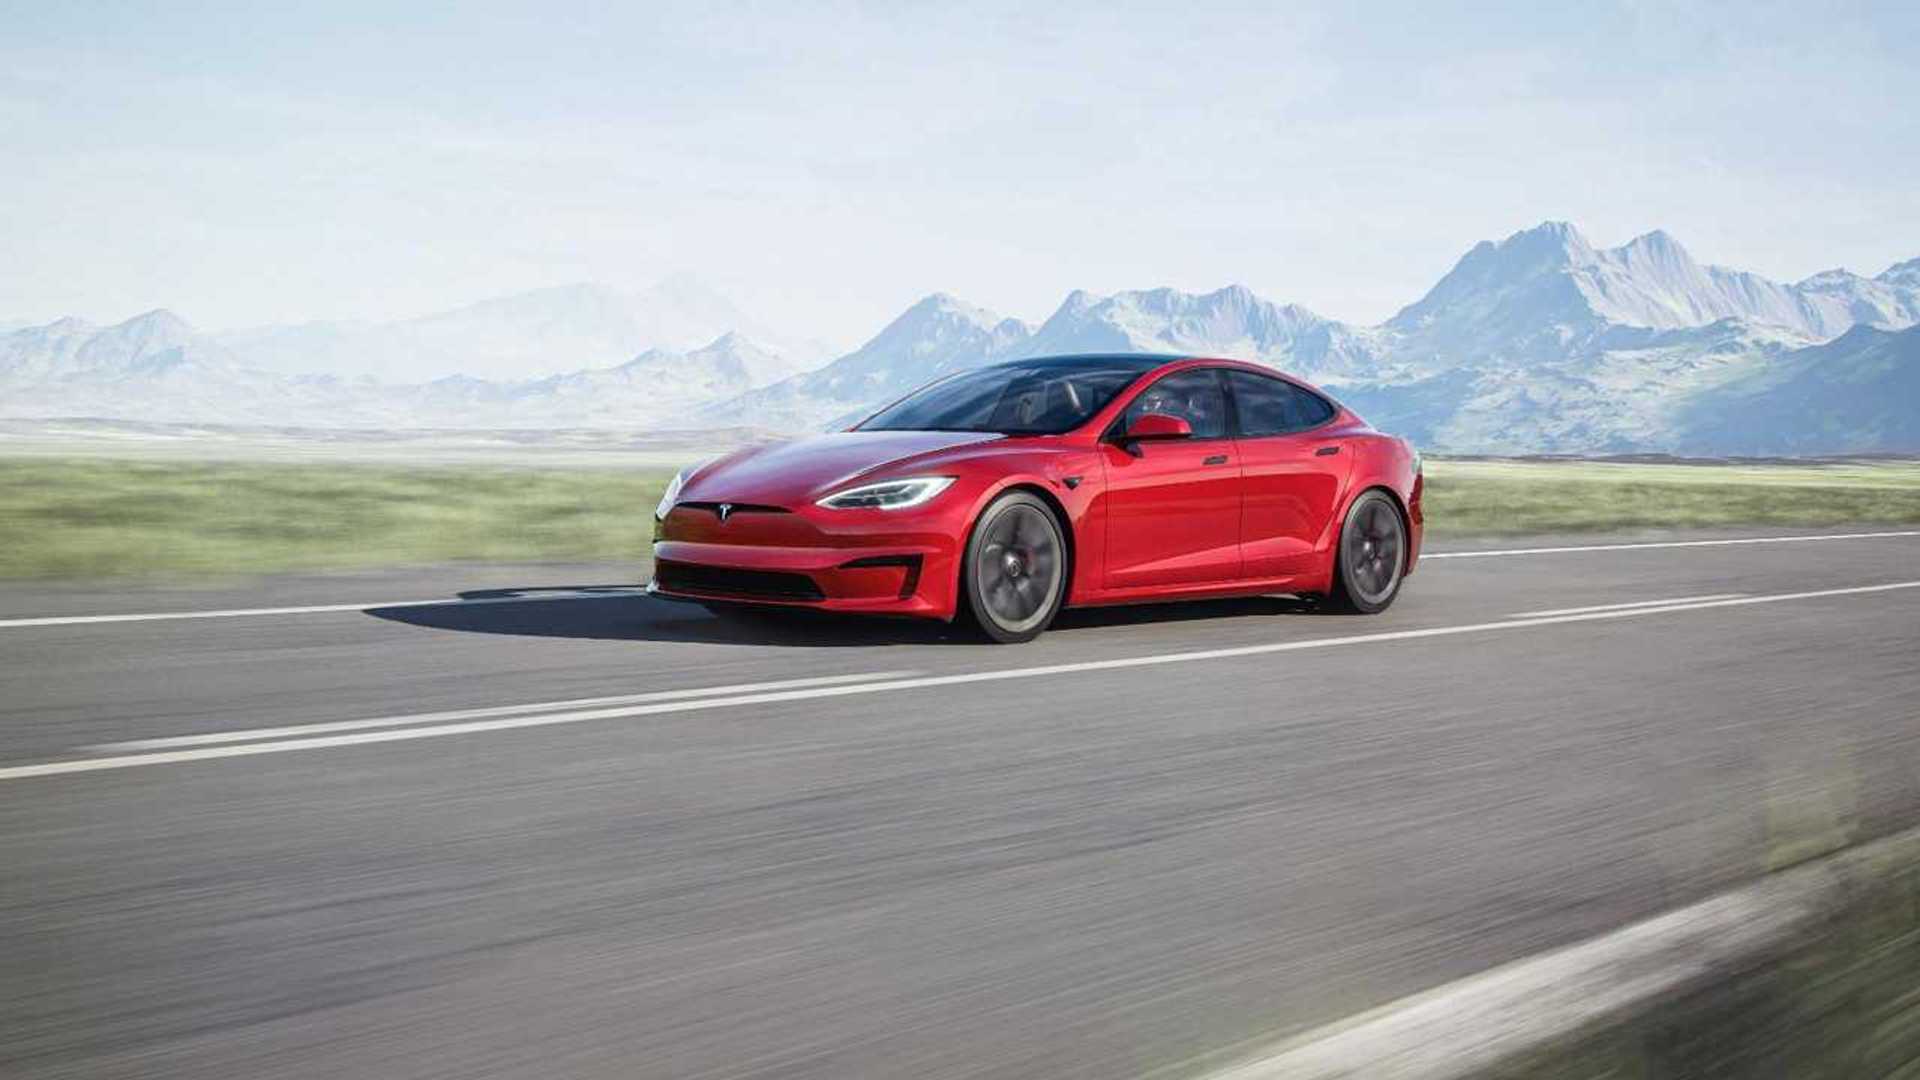 tesla model s may get 217-mph top speed with brake upgrade